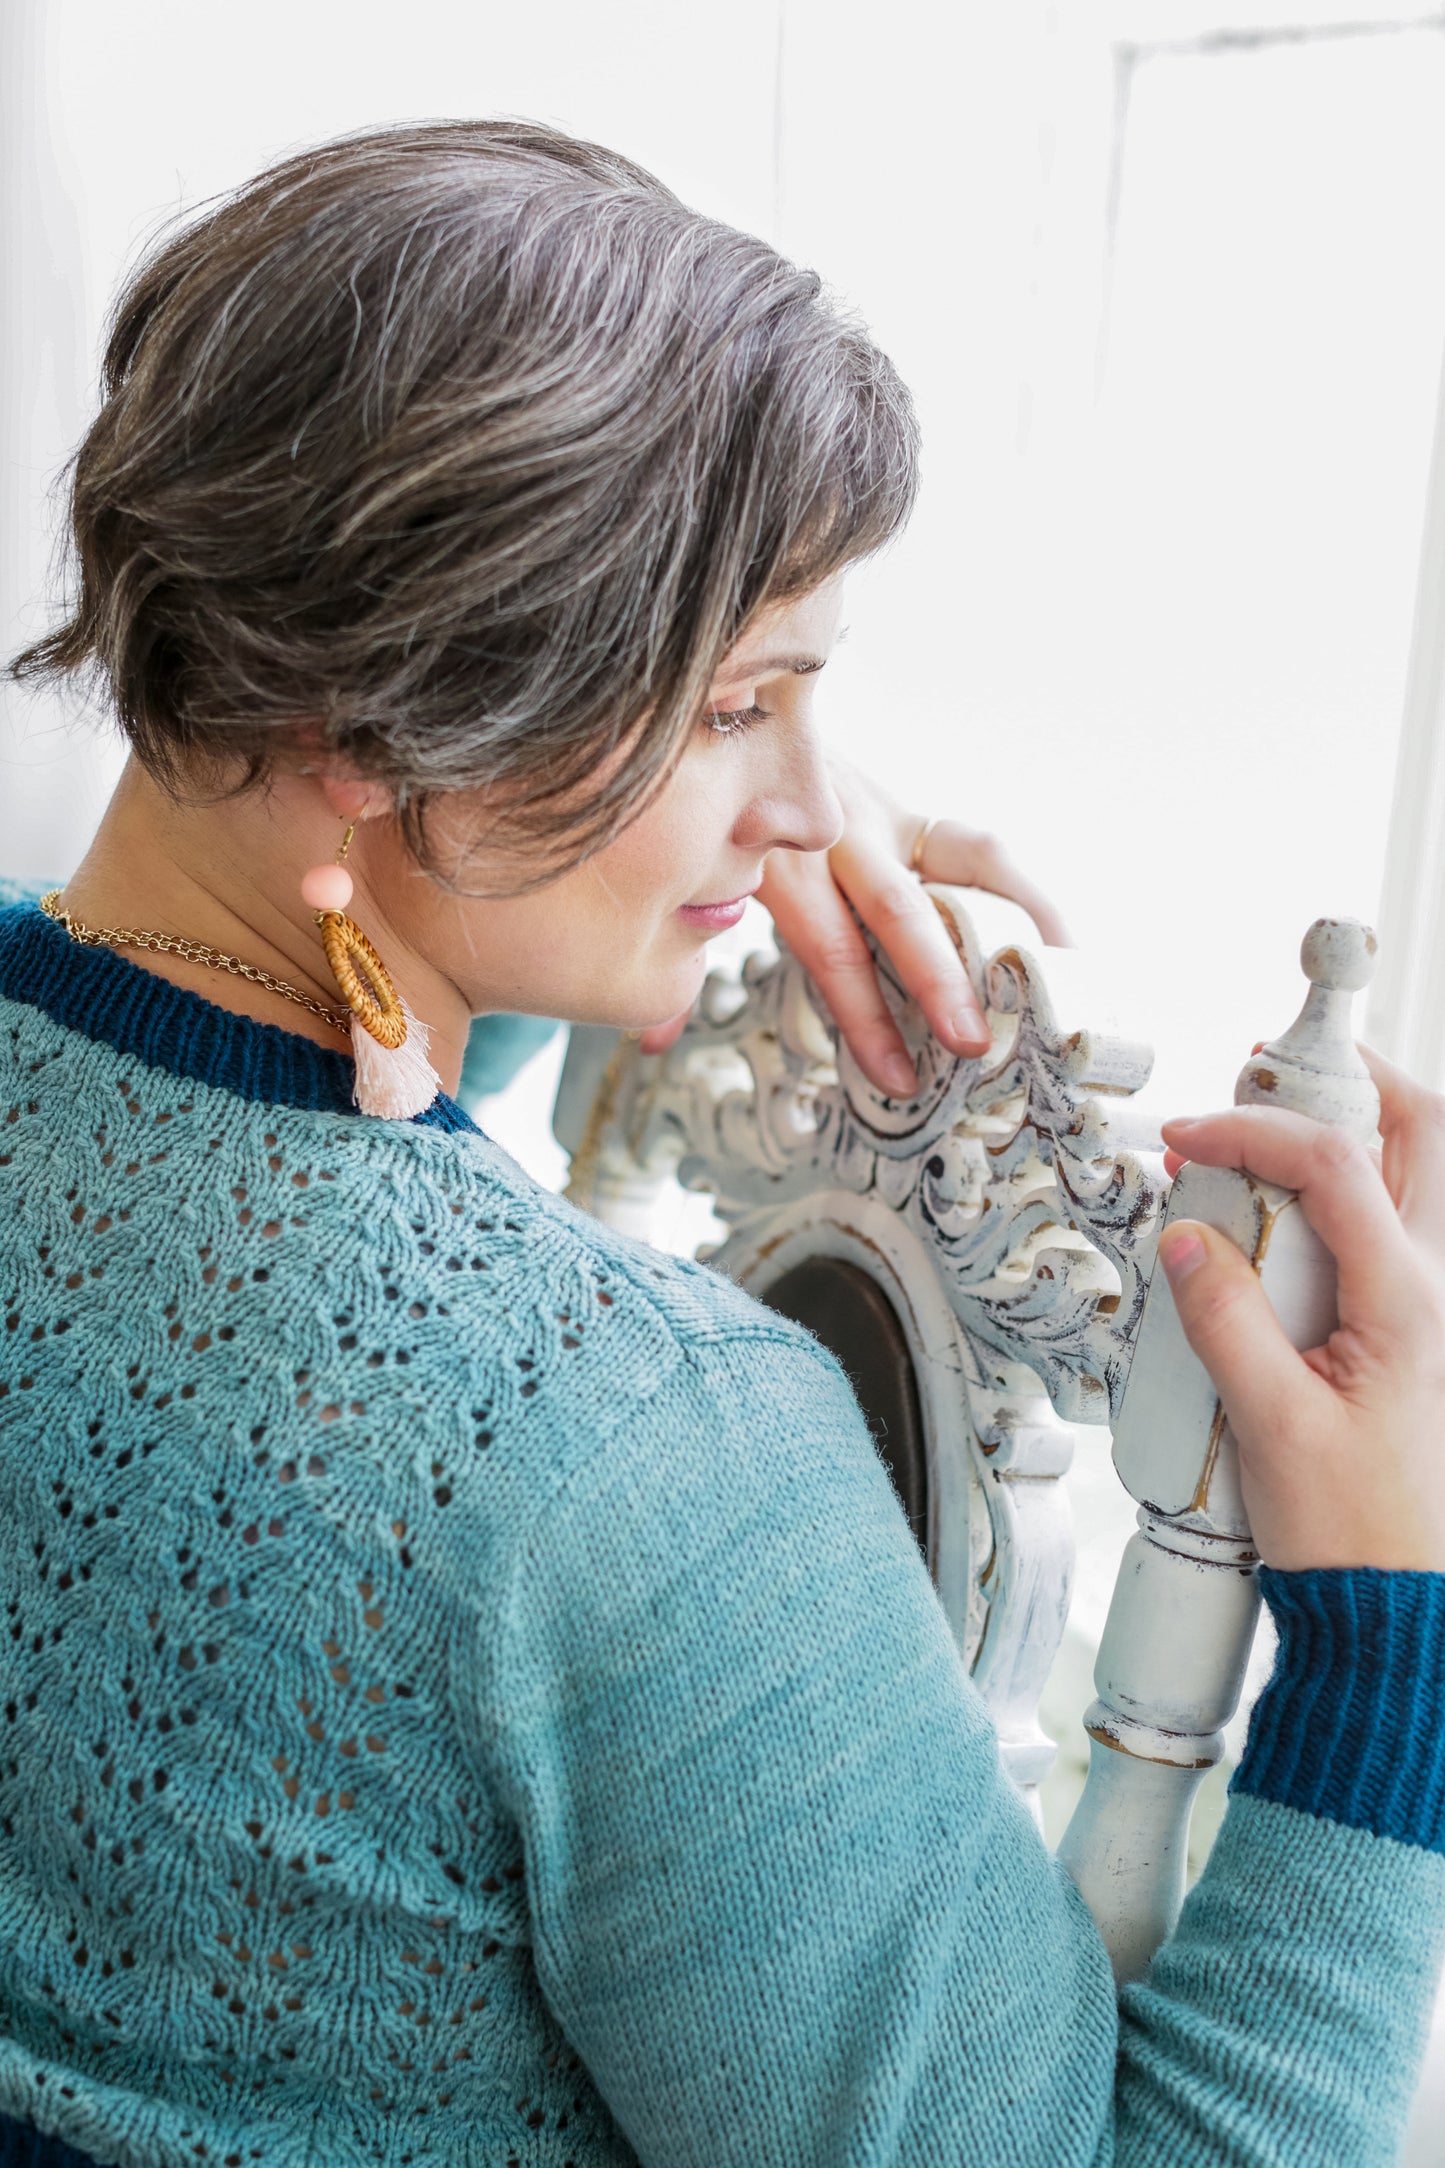 Seen close up from behind, Jen wears a light blue sweater, knit with dark blue cuffs and neckline. The sweater features a lace design on the body.